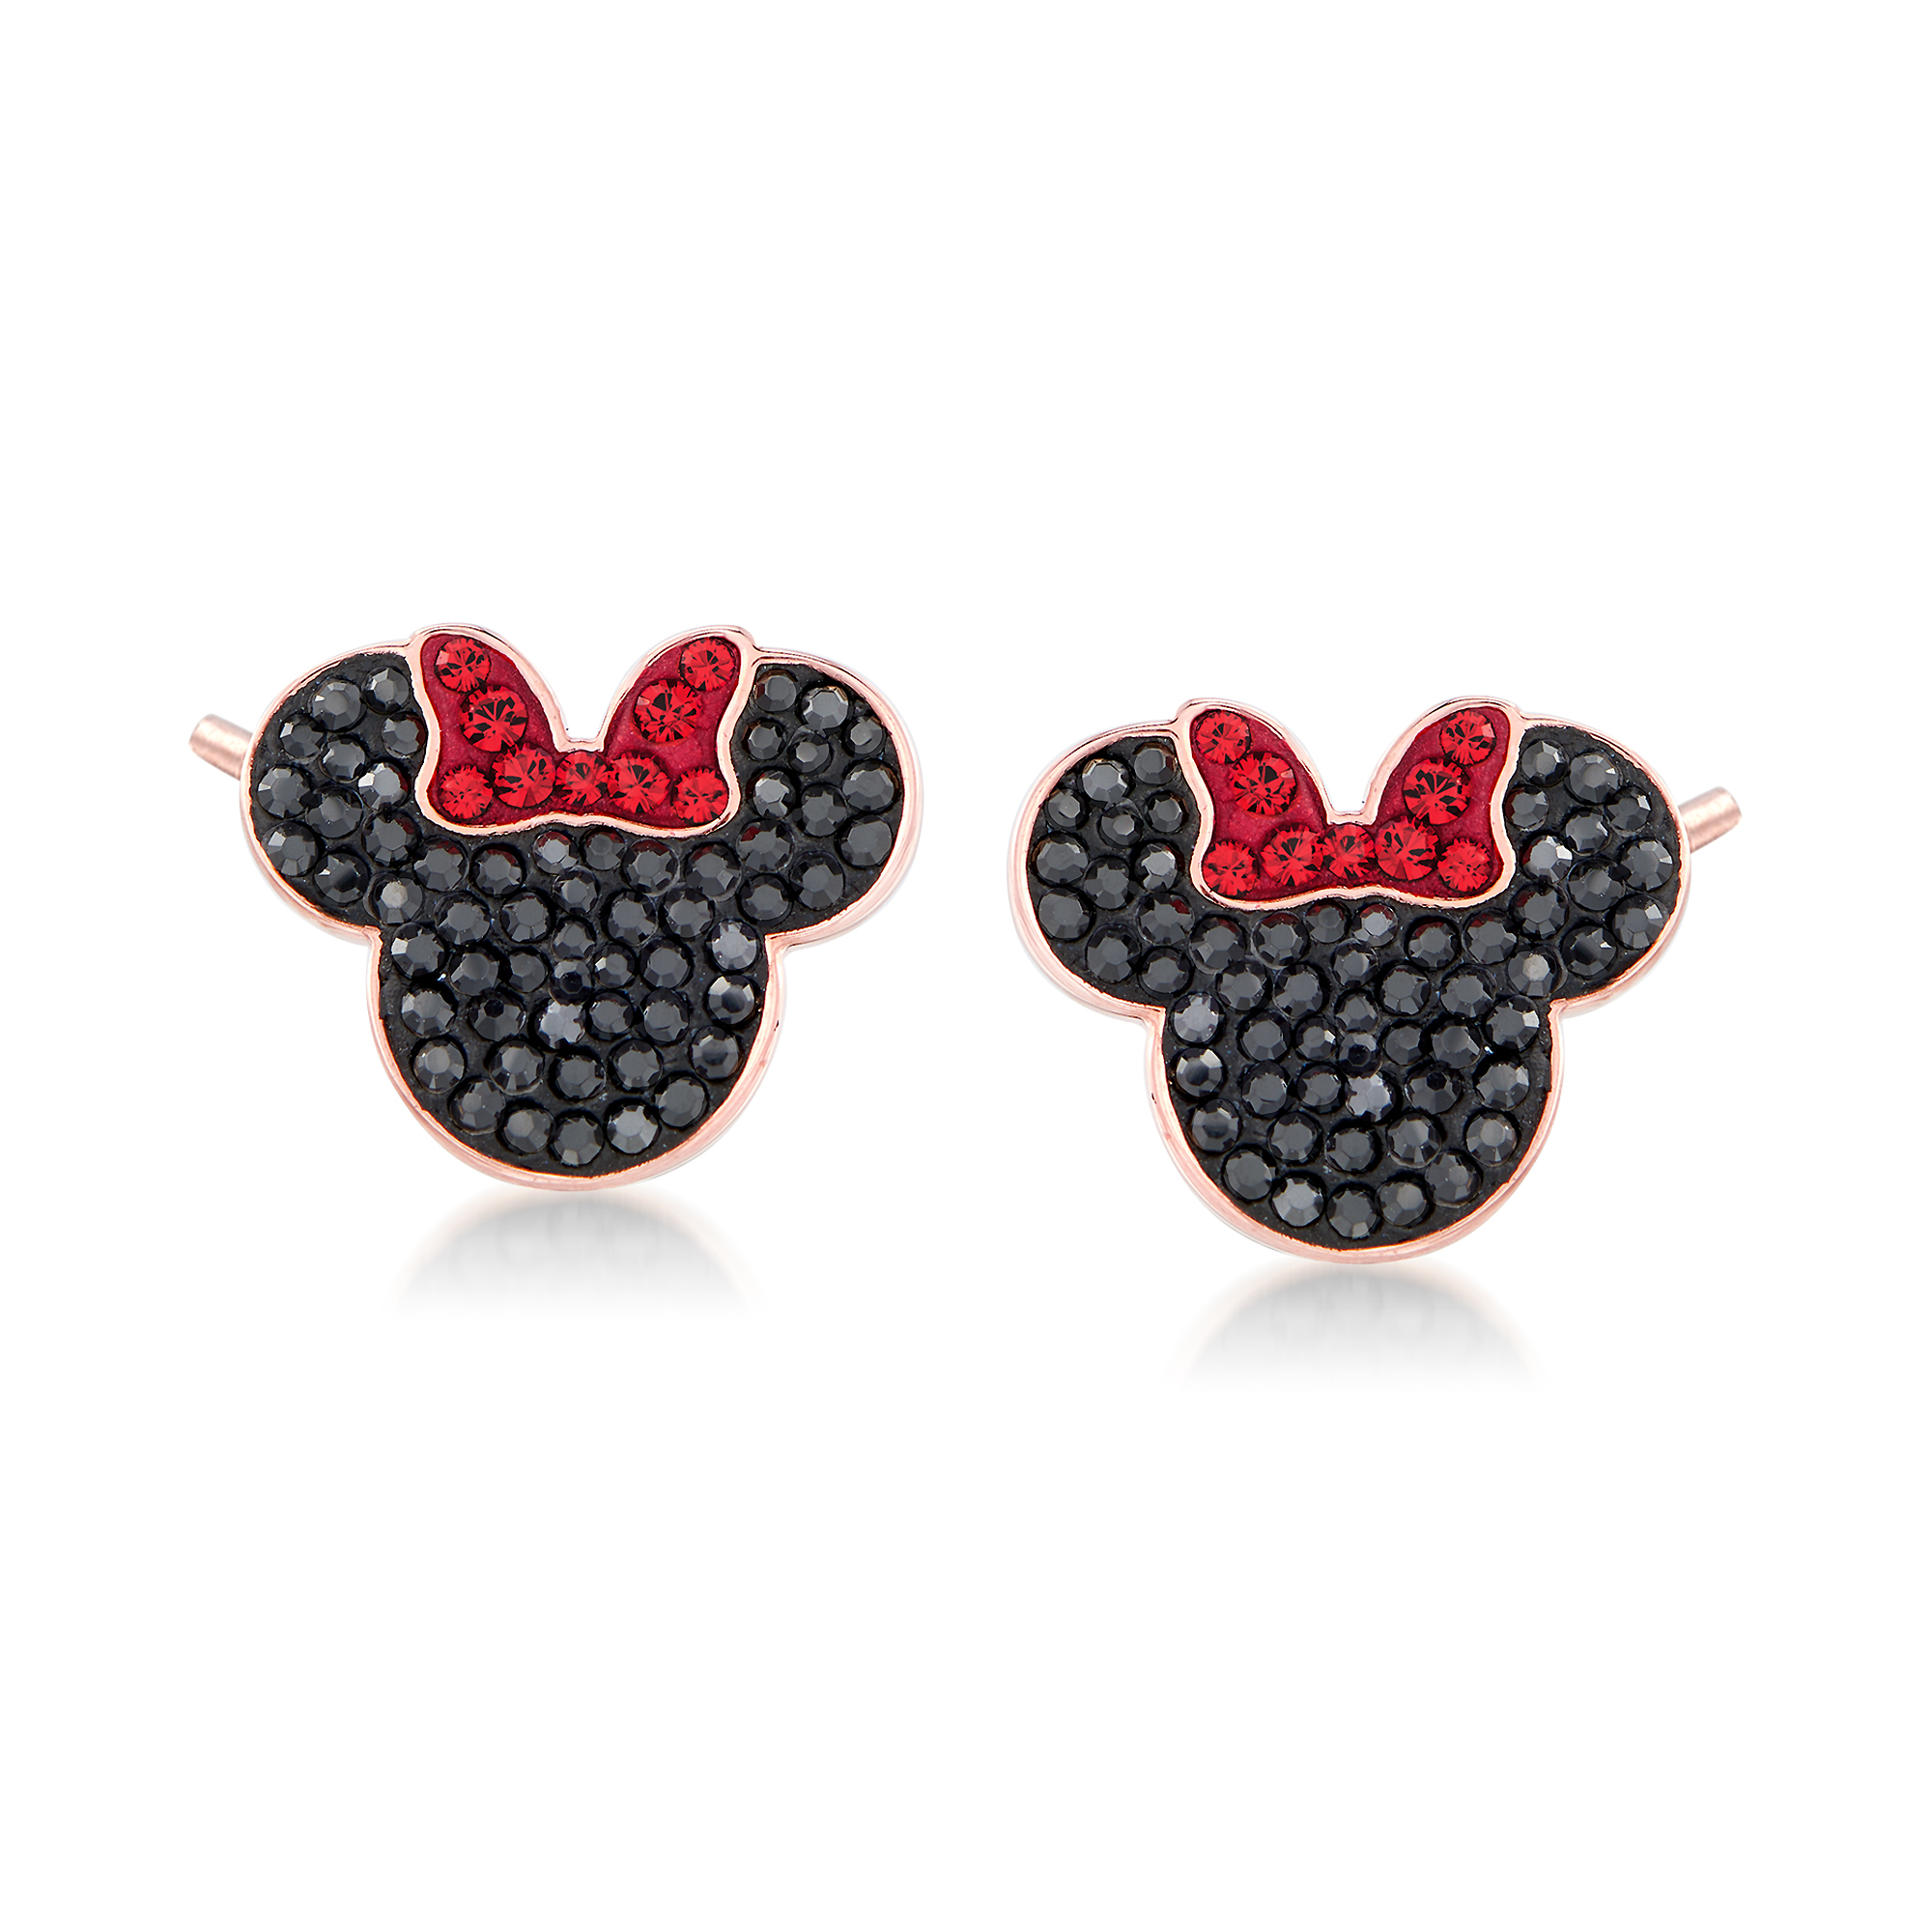 Swarovski Crystal Minnie Mouse Stud Earrings in Rose Gold-Plated Metal |  Ross-Simons